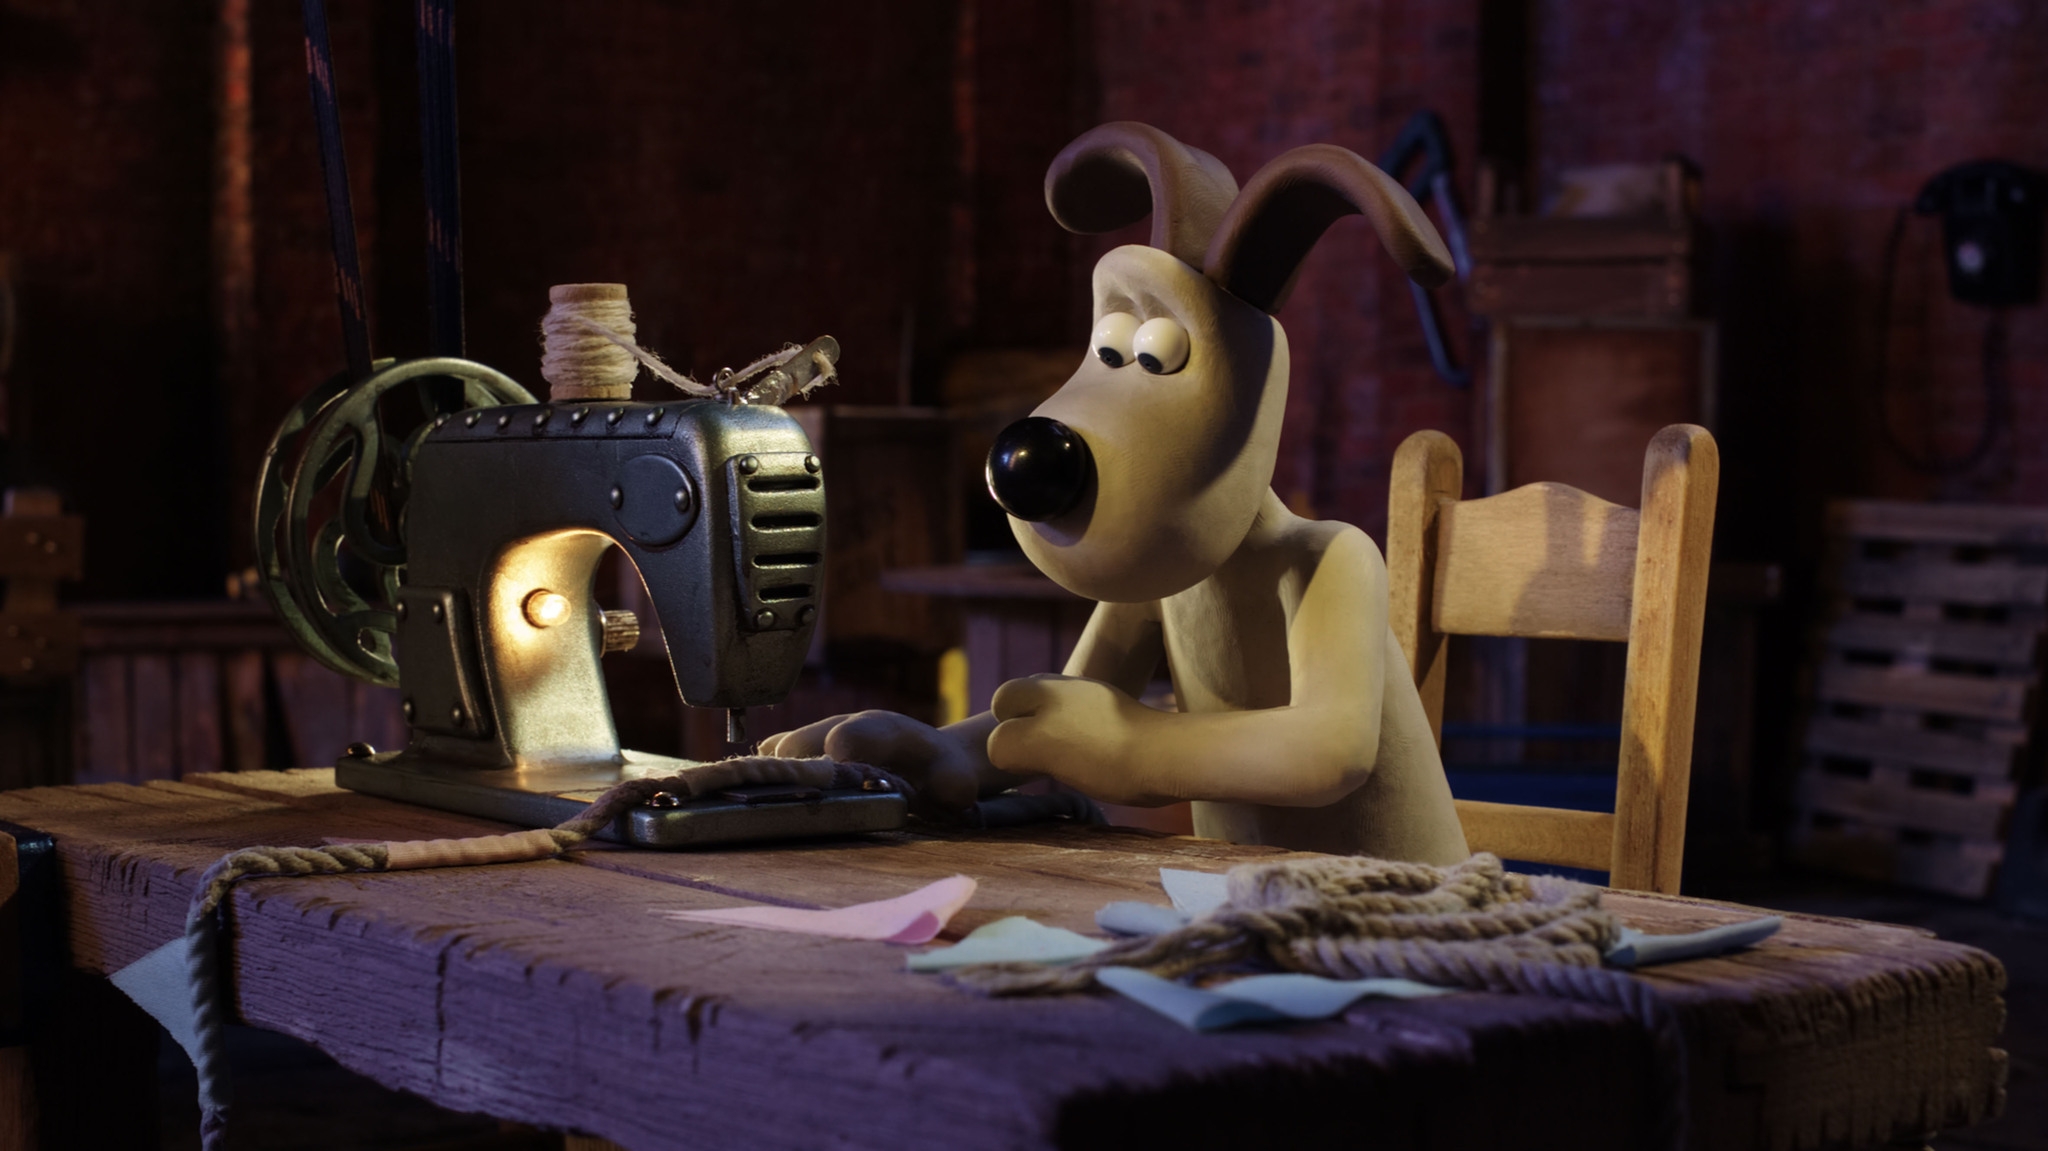 Gromit, Gromit Is Sewing - Wallace And Gromit Scenes , HD Wallpaper & Backgrounds